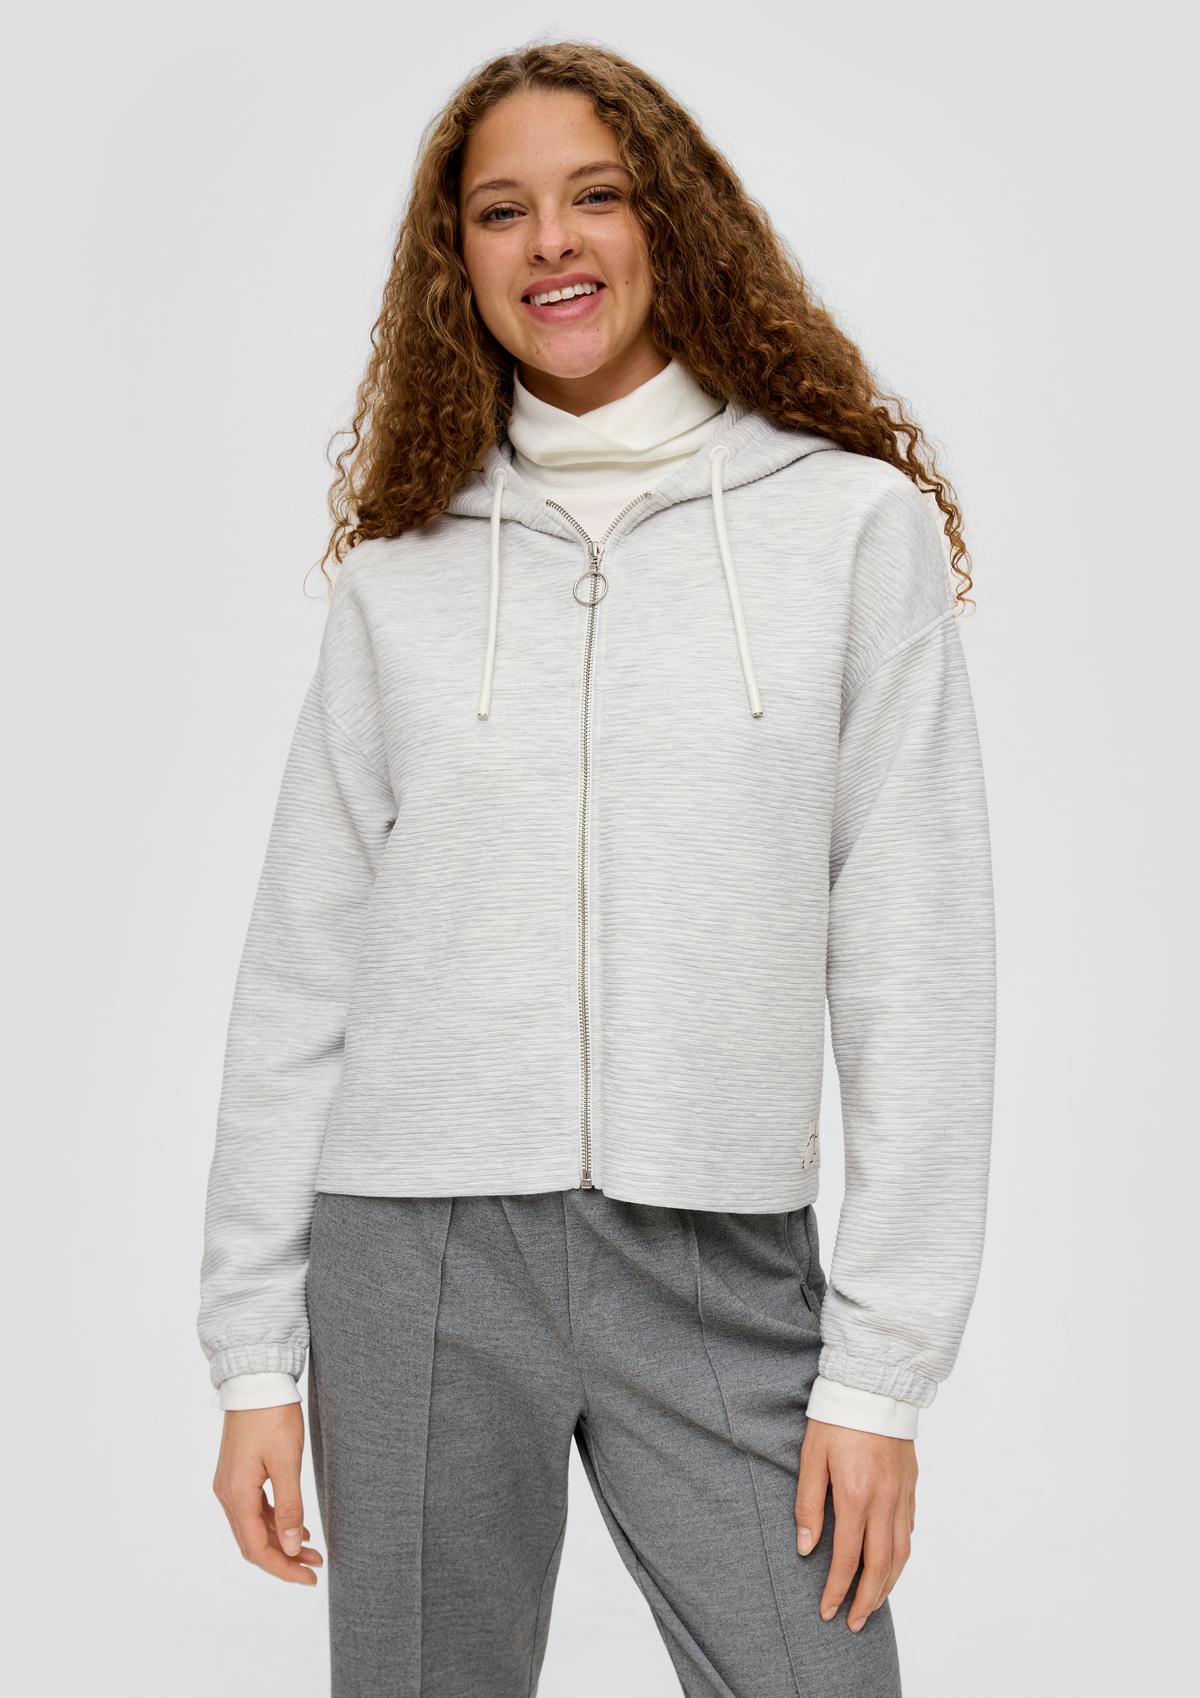 Sweatshirt jacket with a ribbed texture